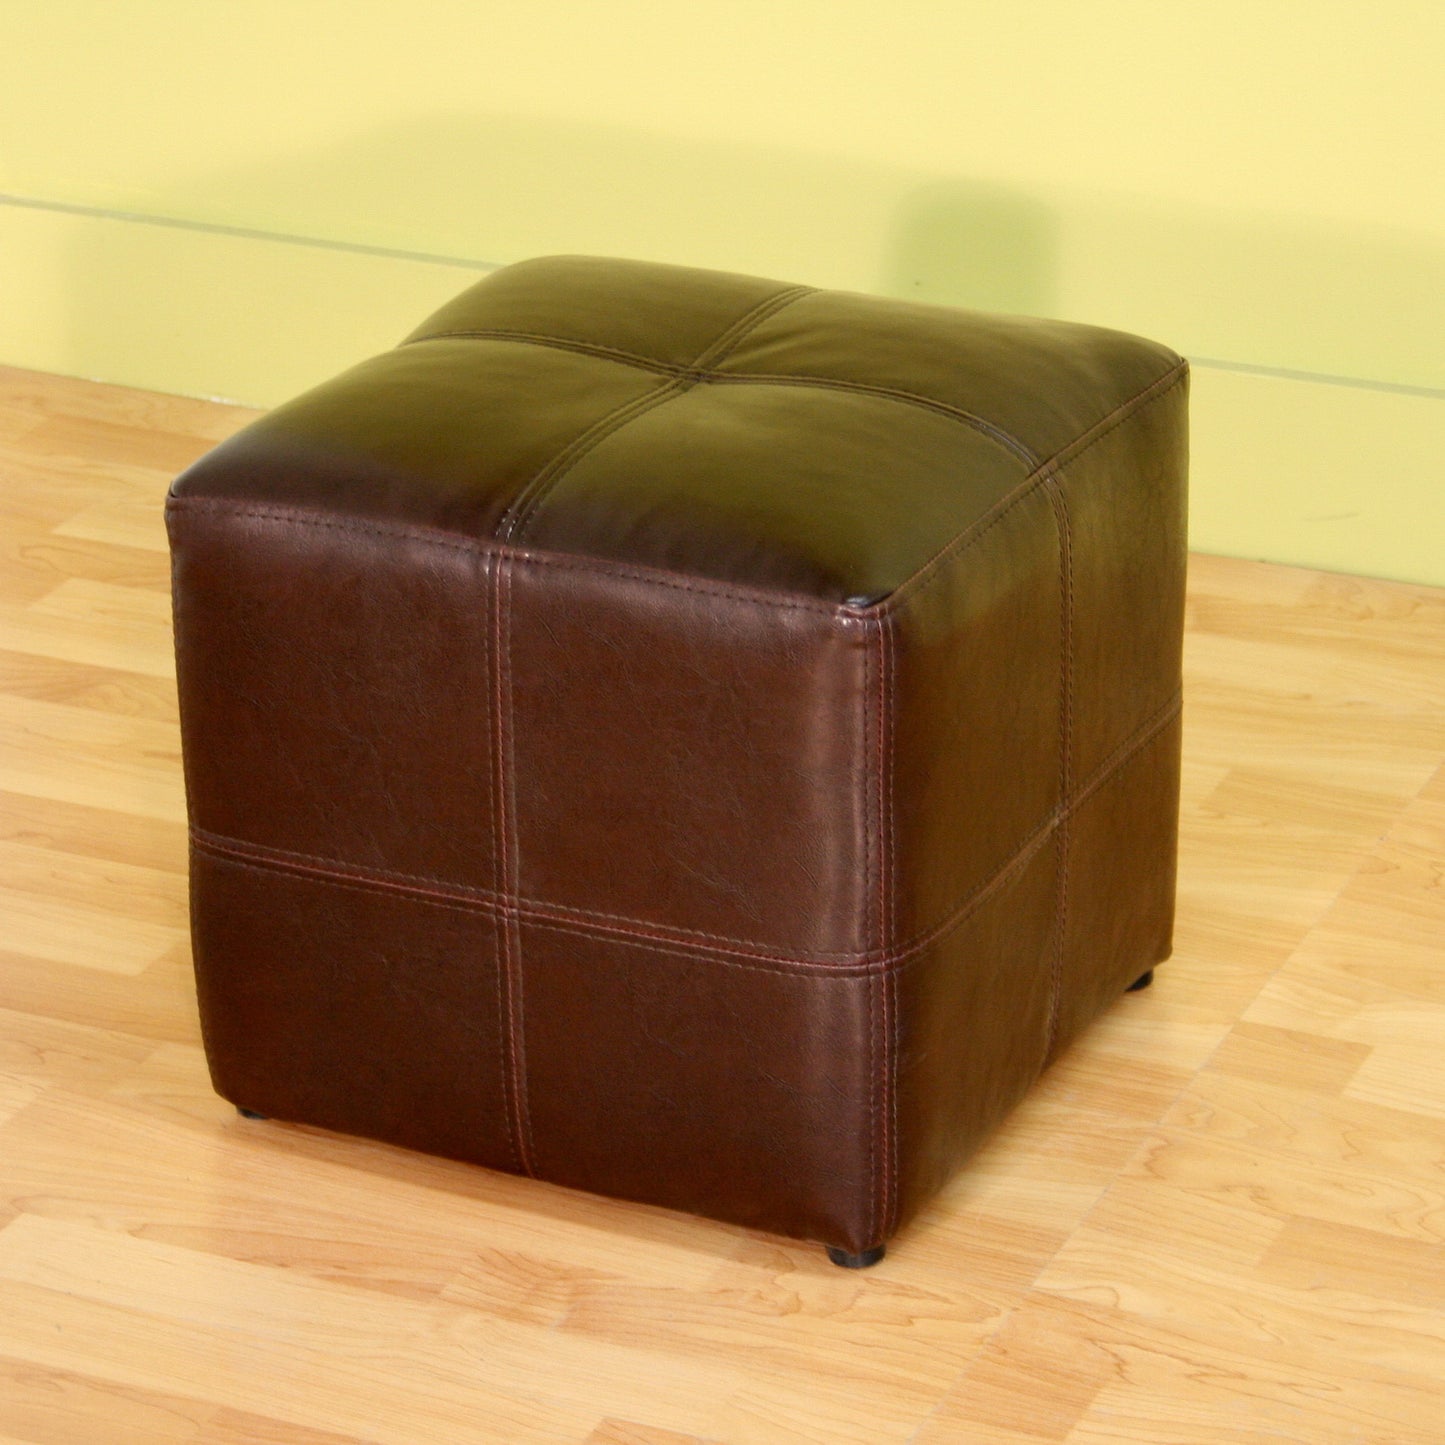 Contemporary Stool Ottoman in Dark Brown Bonded Leather bxi3190-27